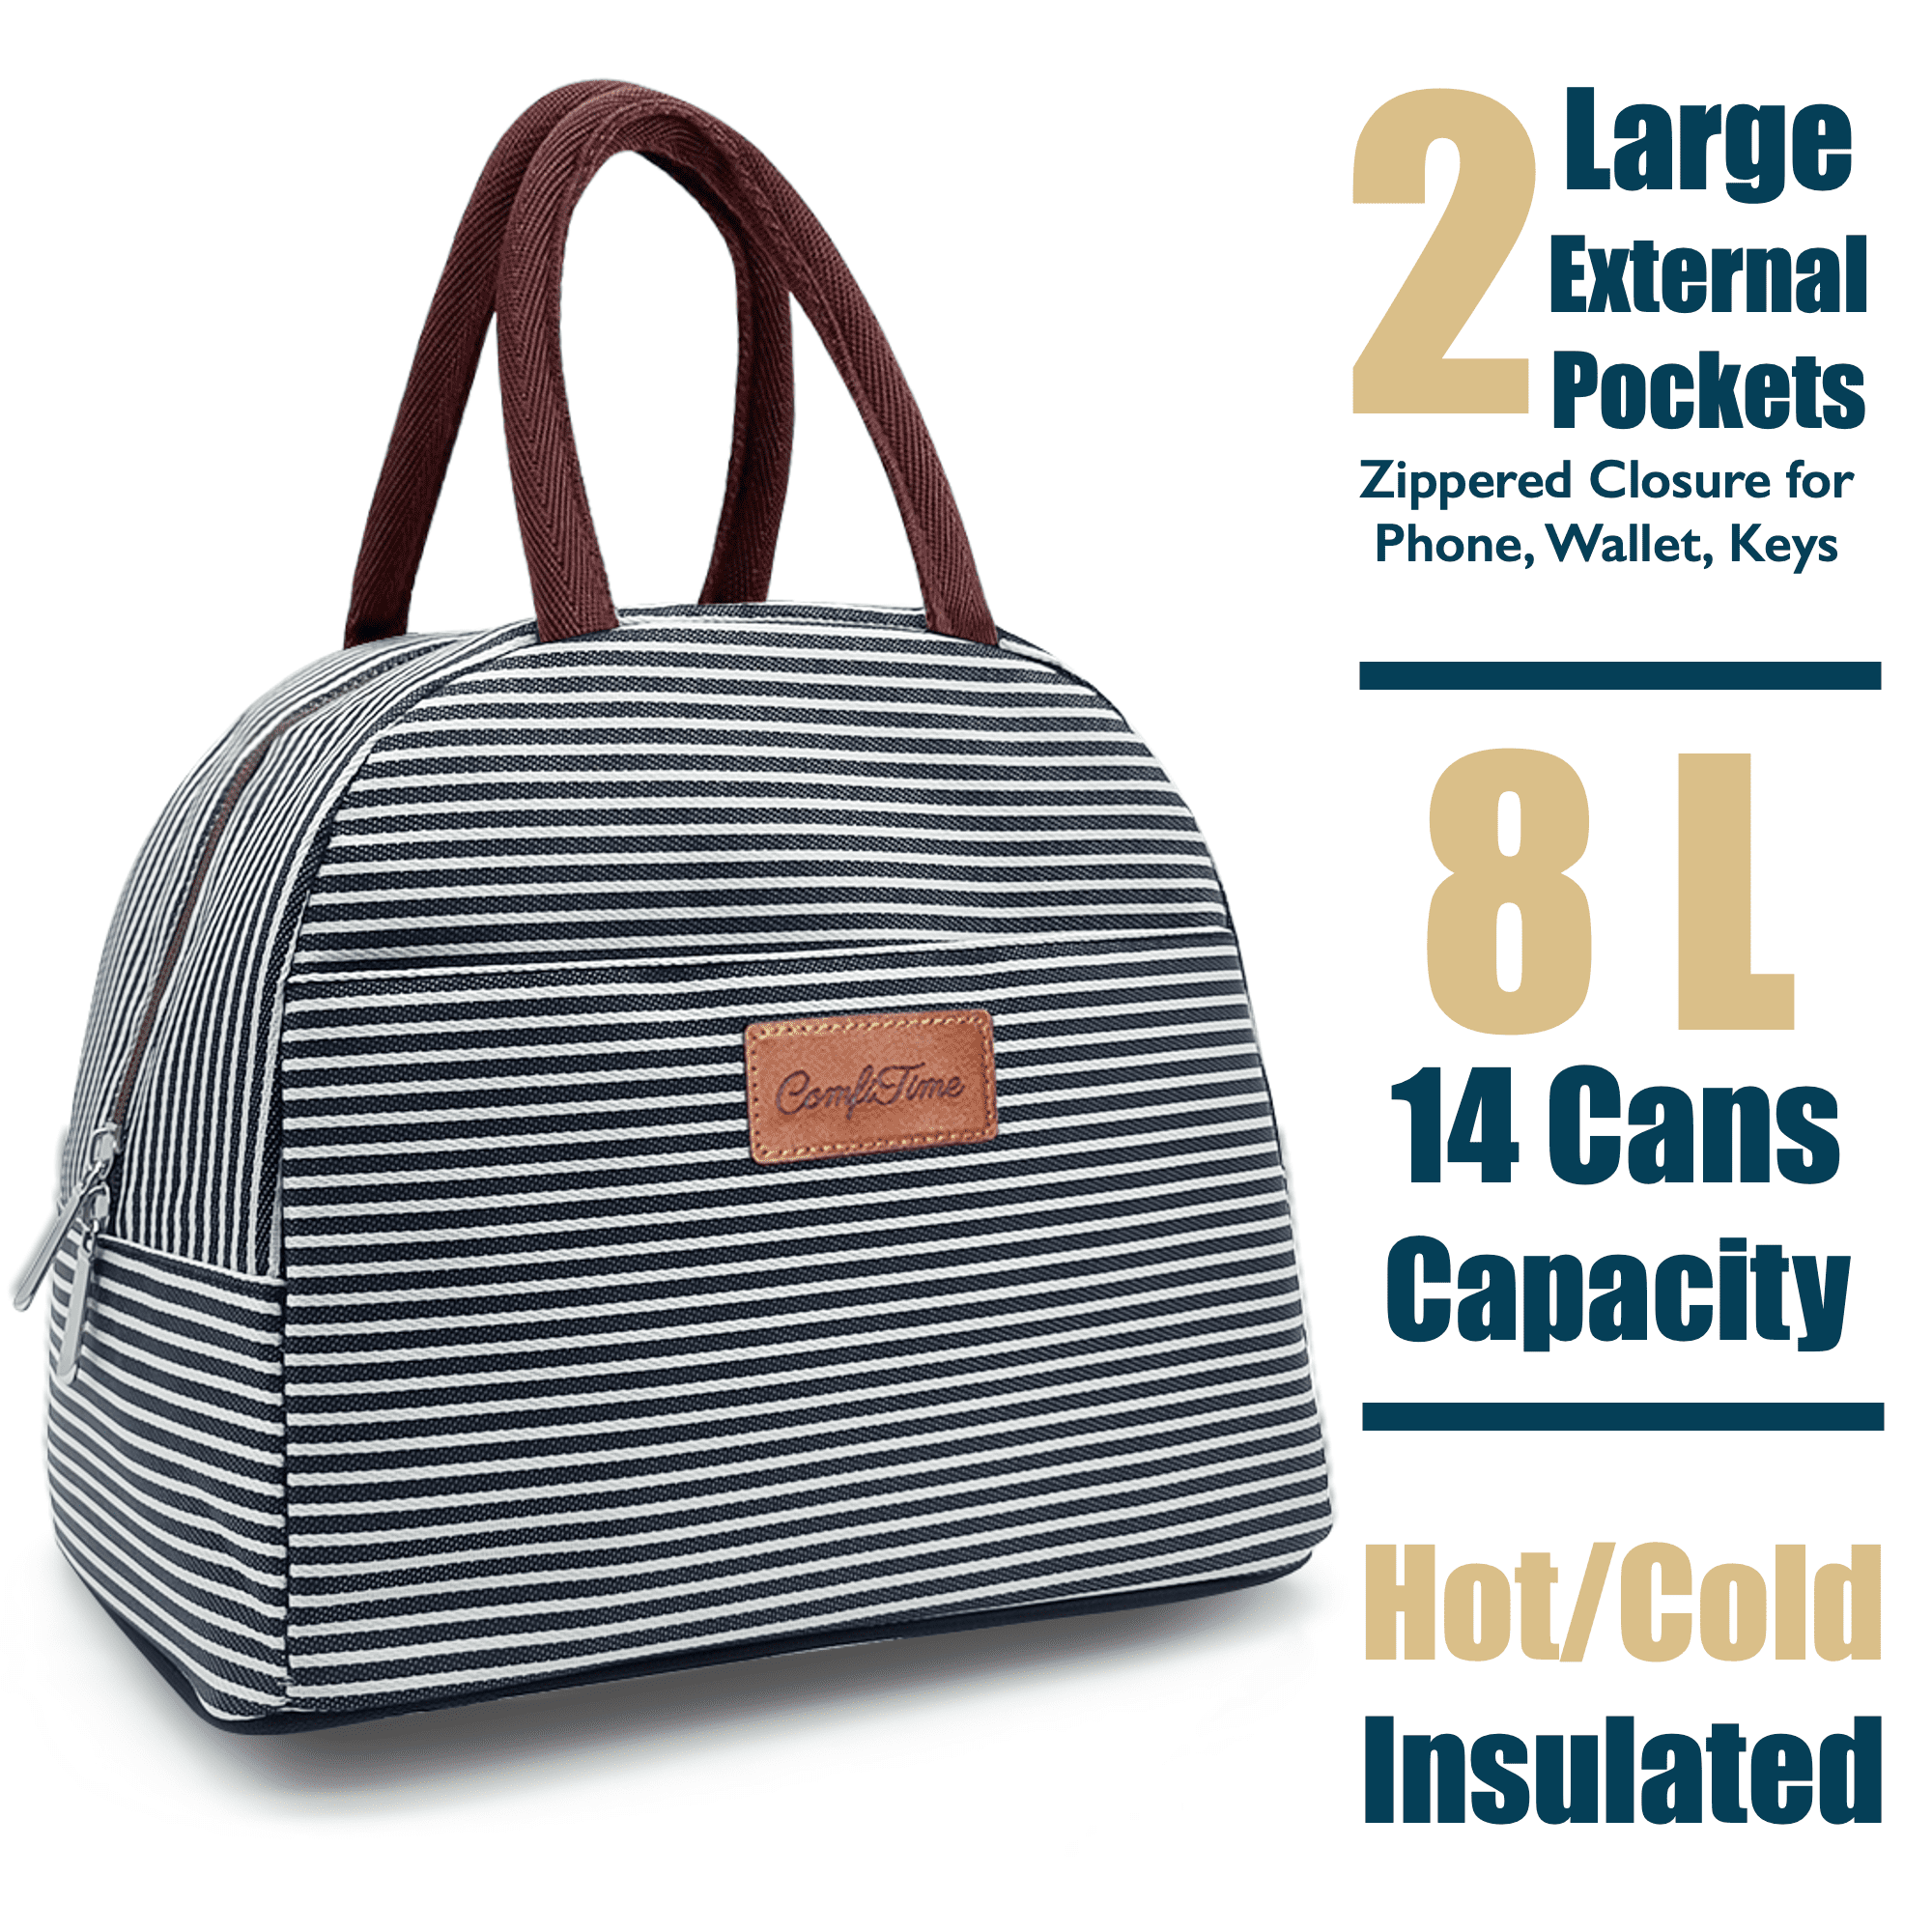 ComfiTime Lunch Bag - Insulated Lunch Box for Women, 8L or 14 Cans ...